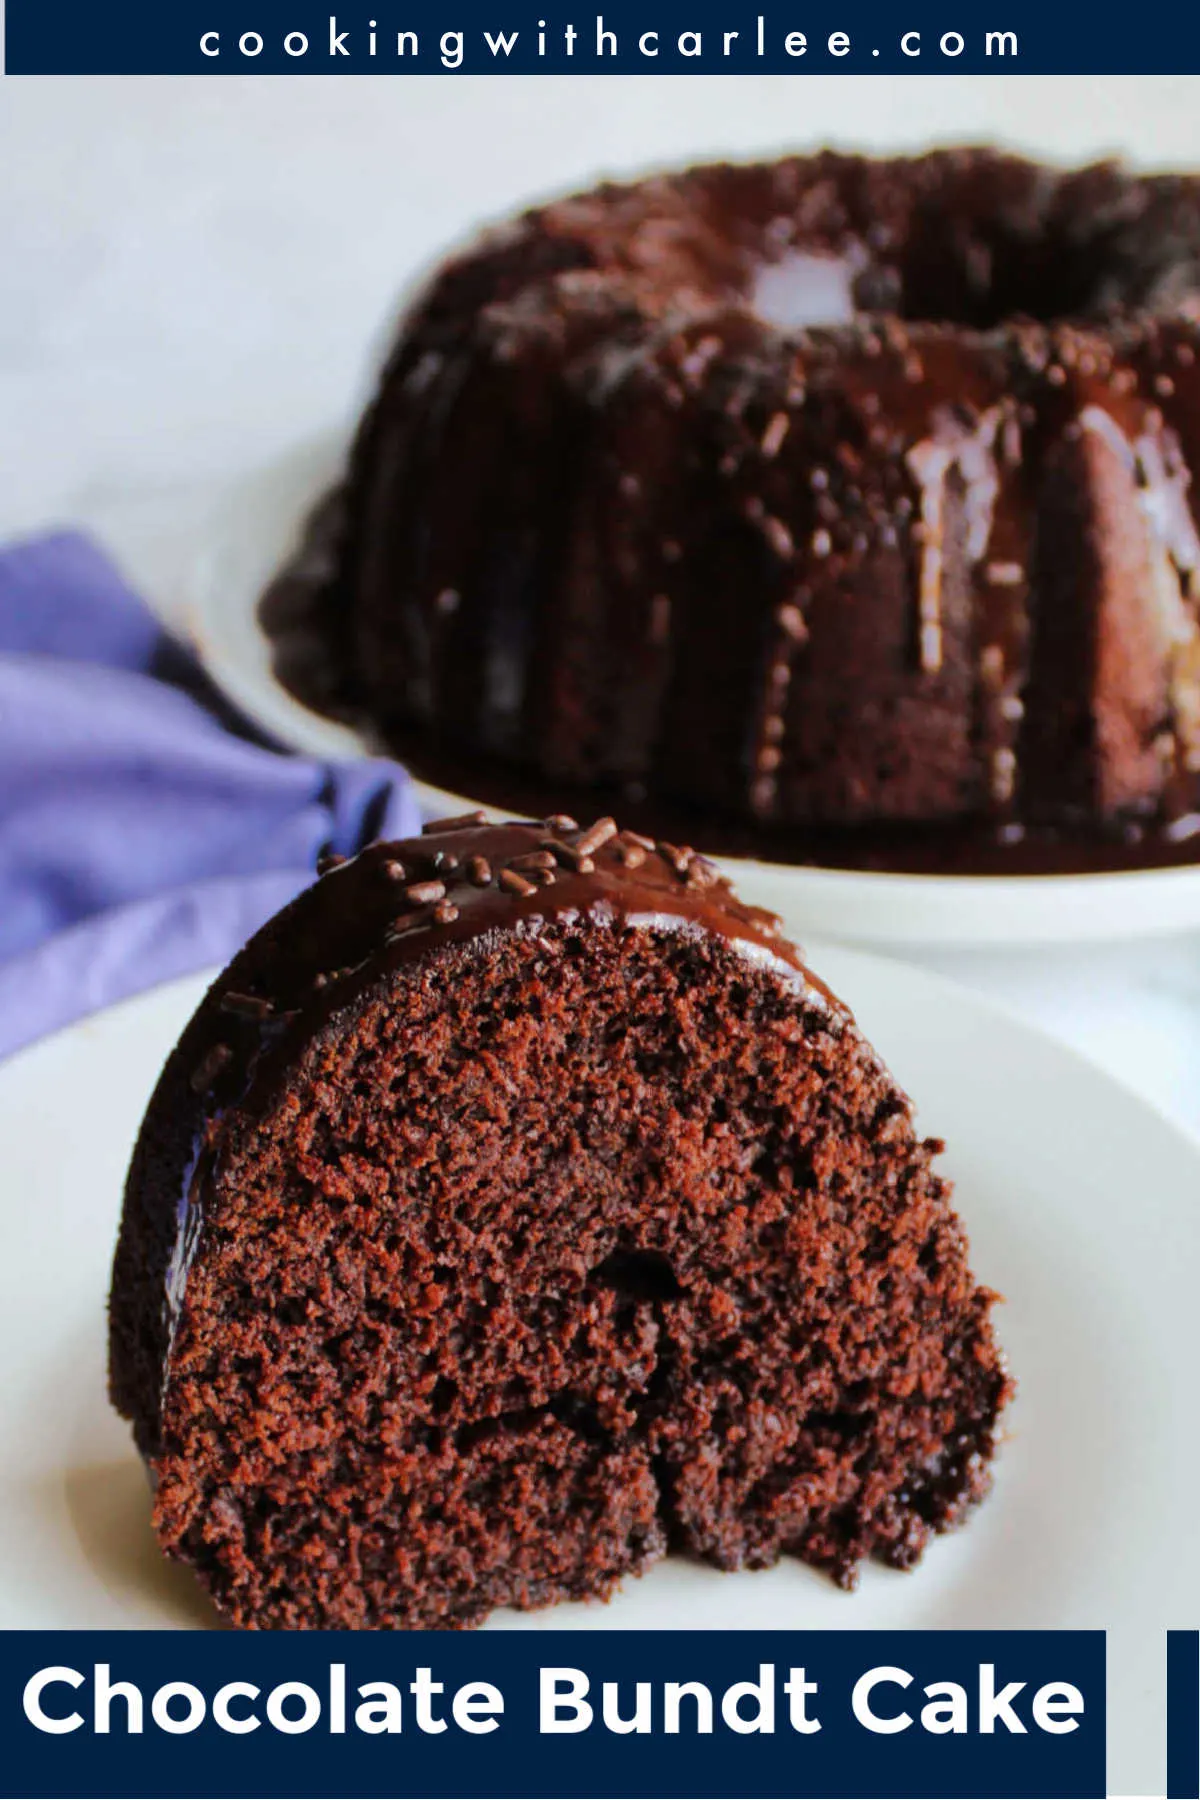 Whip up this chocolate Bundt cake with rich chocolate glaze for your next special event. The recipe is from scratch, but comes together quick and easily to make a moist chocolate cake.